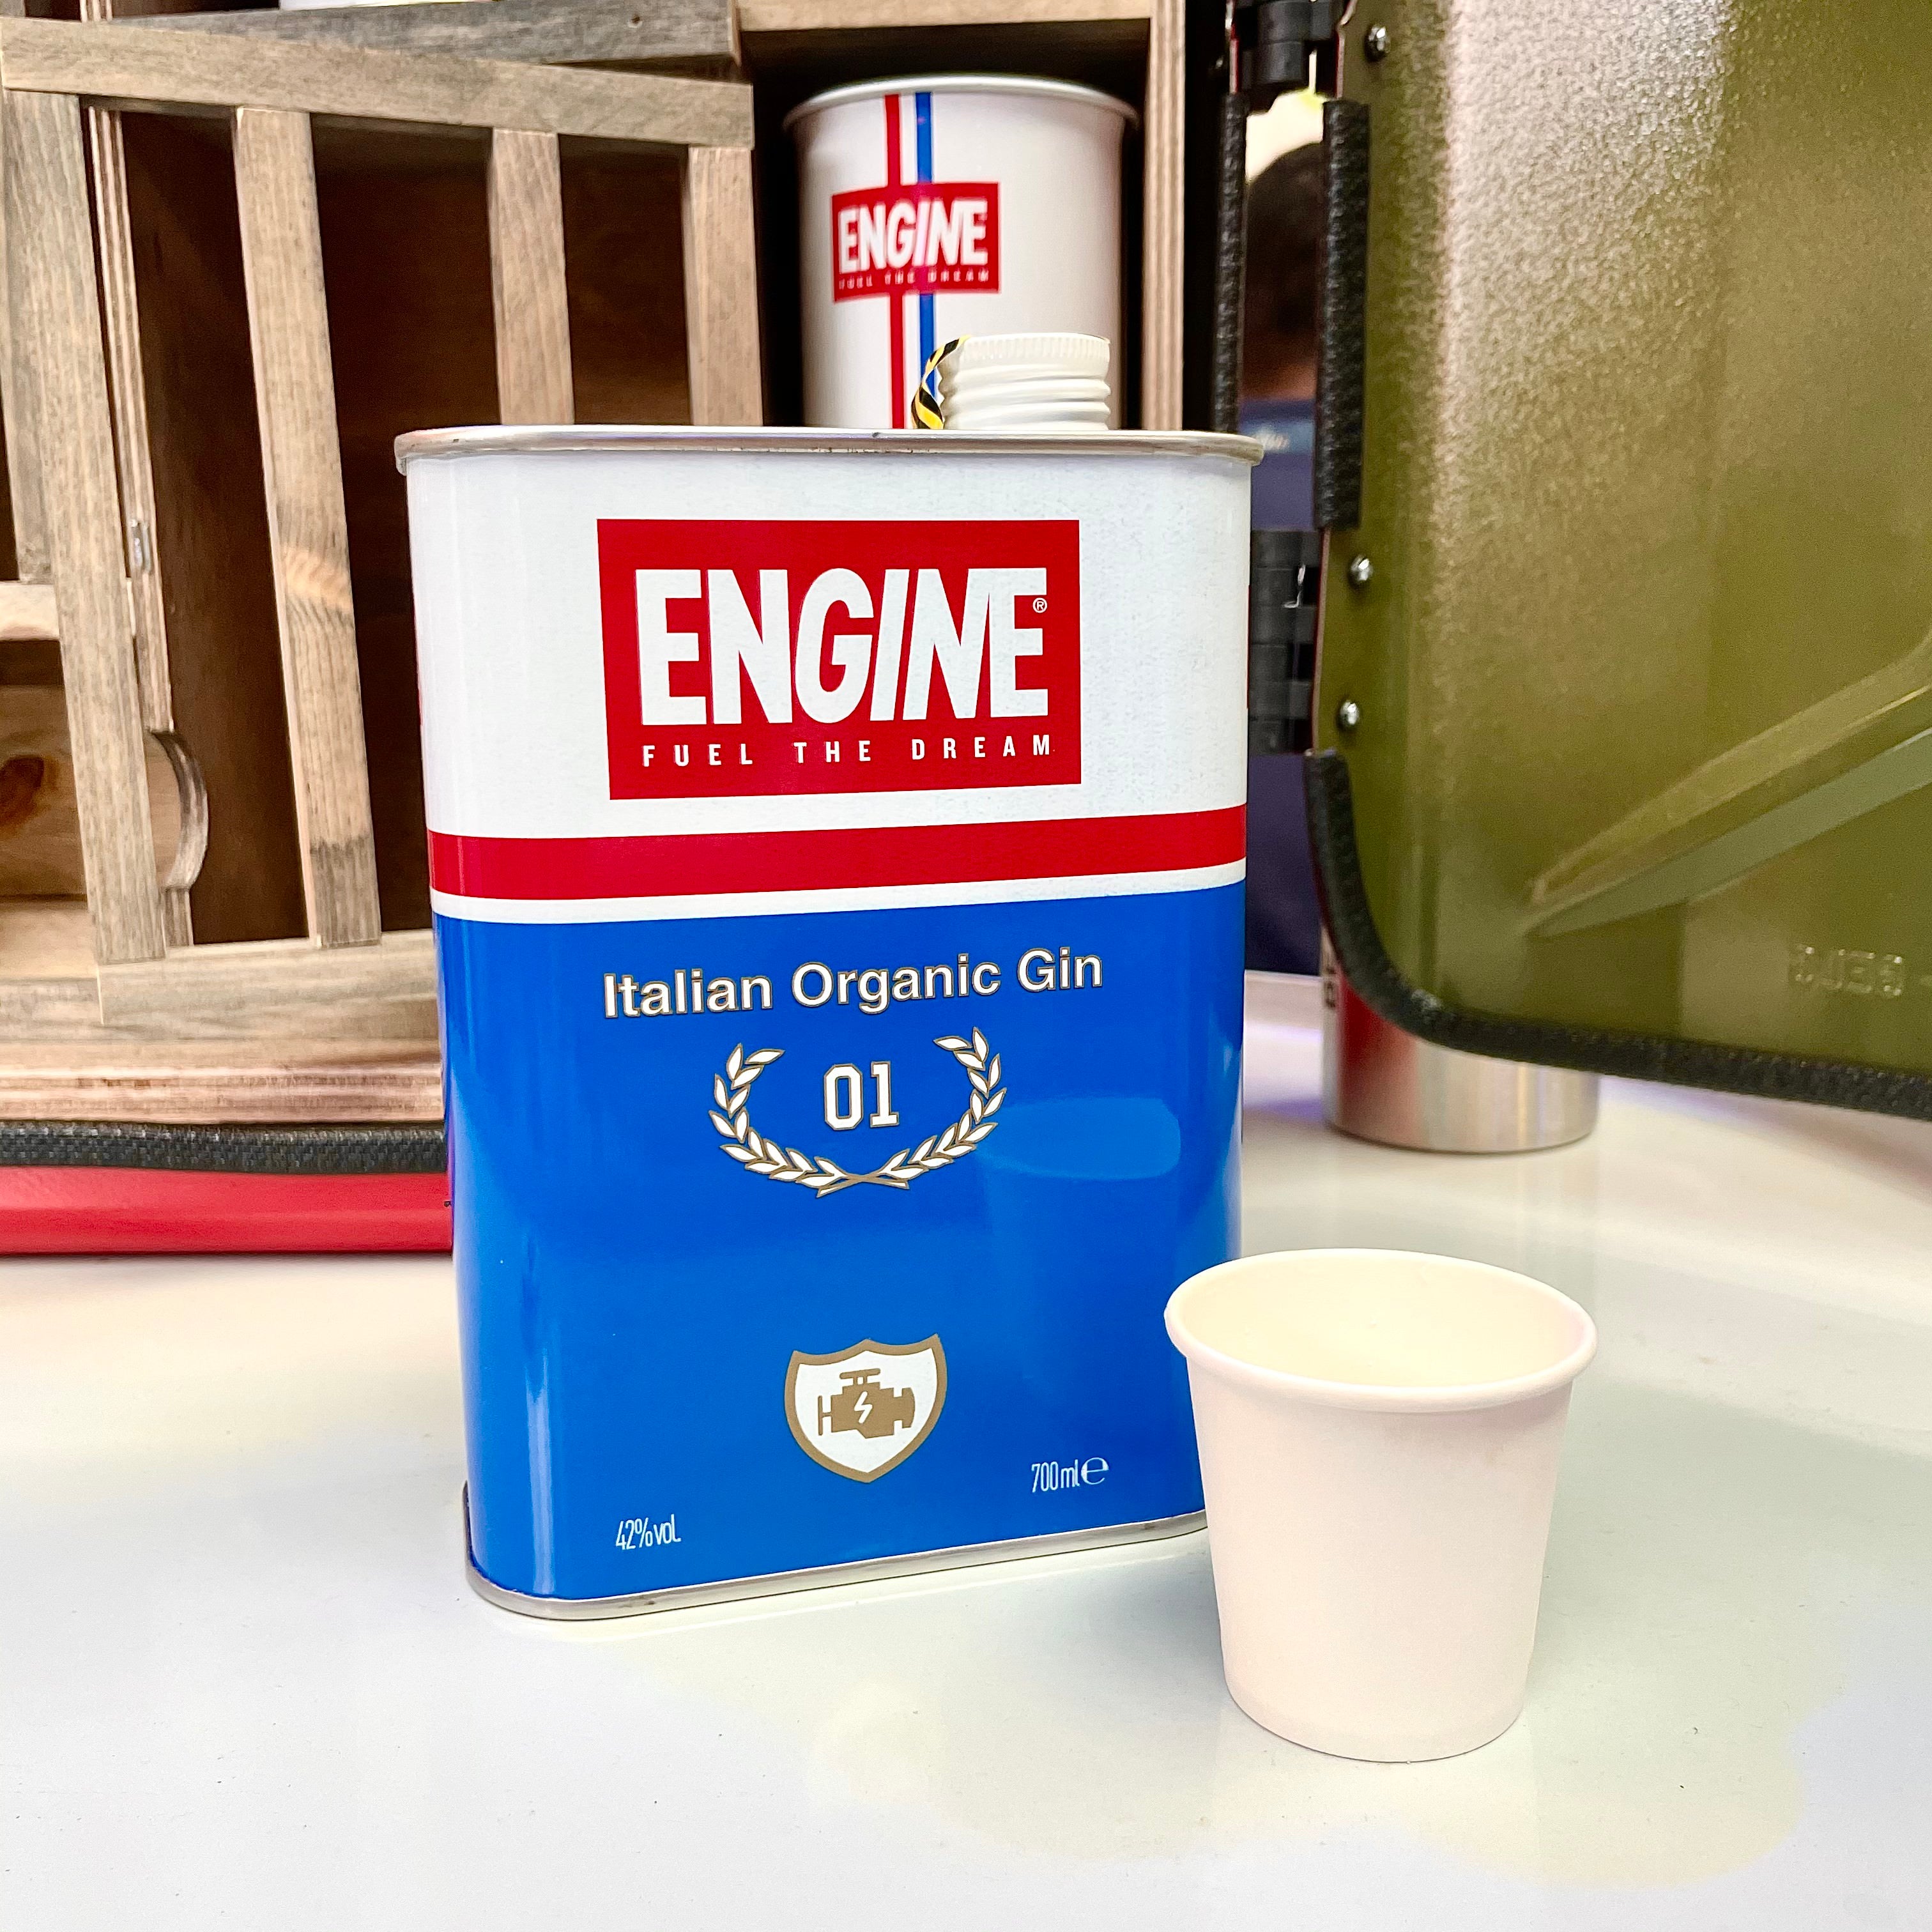 Review & Tasting Notes] Engine Gin Italian Organic Gin, 42% ABV